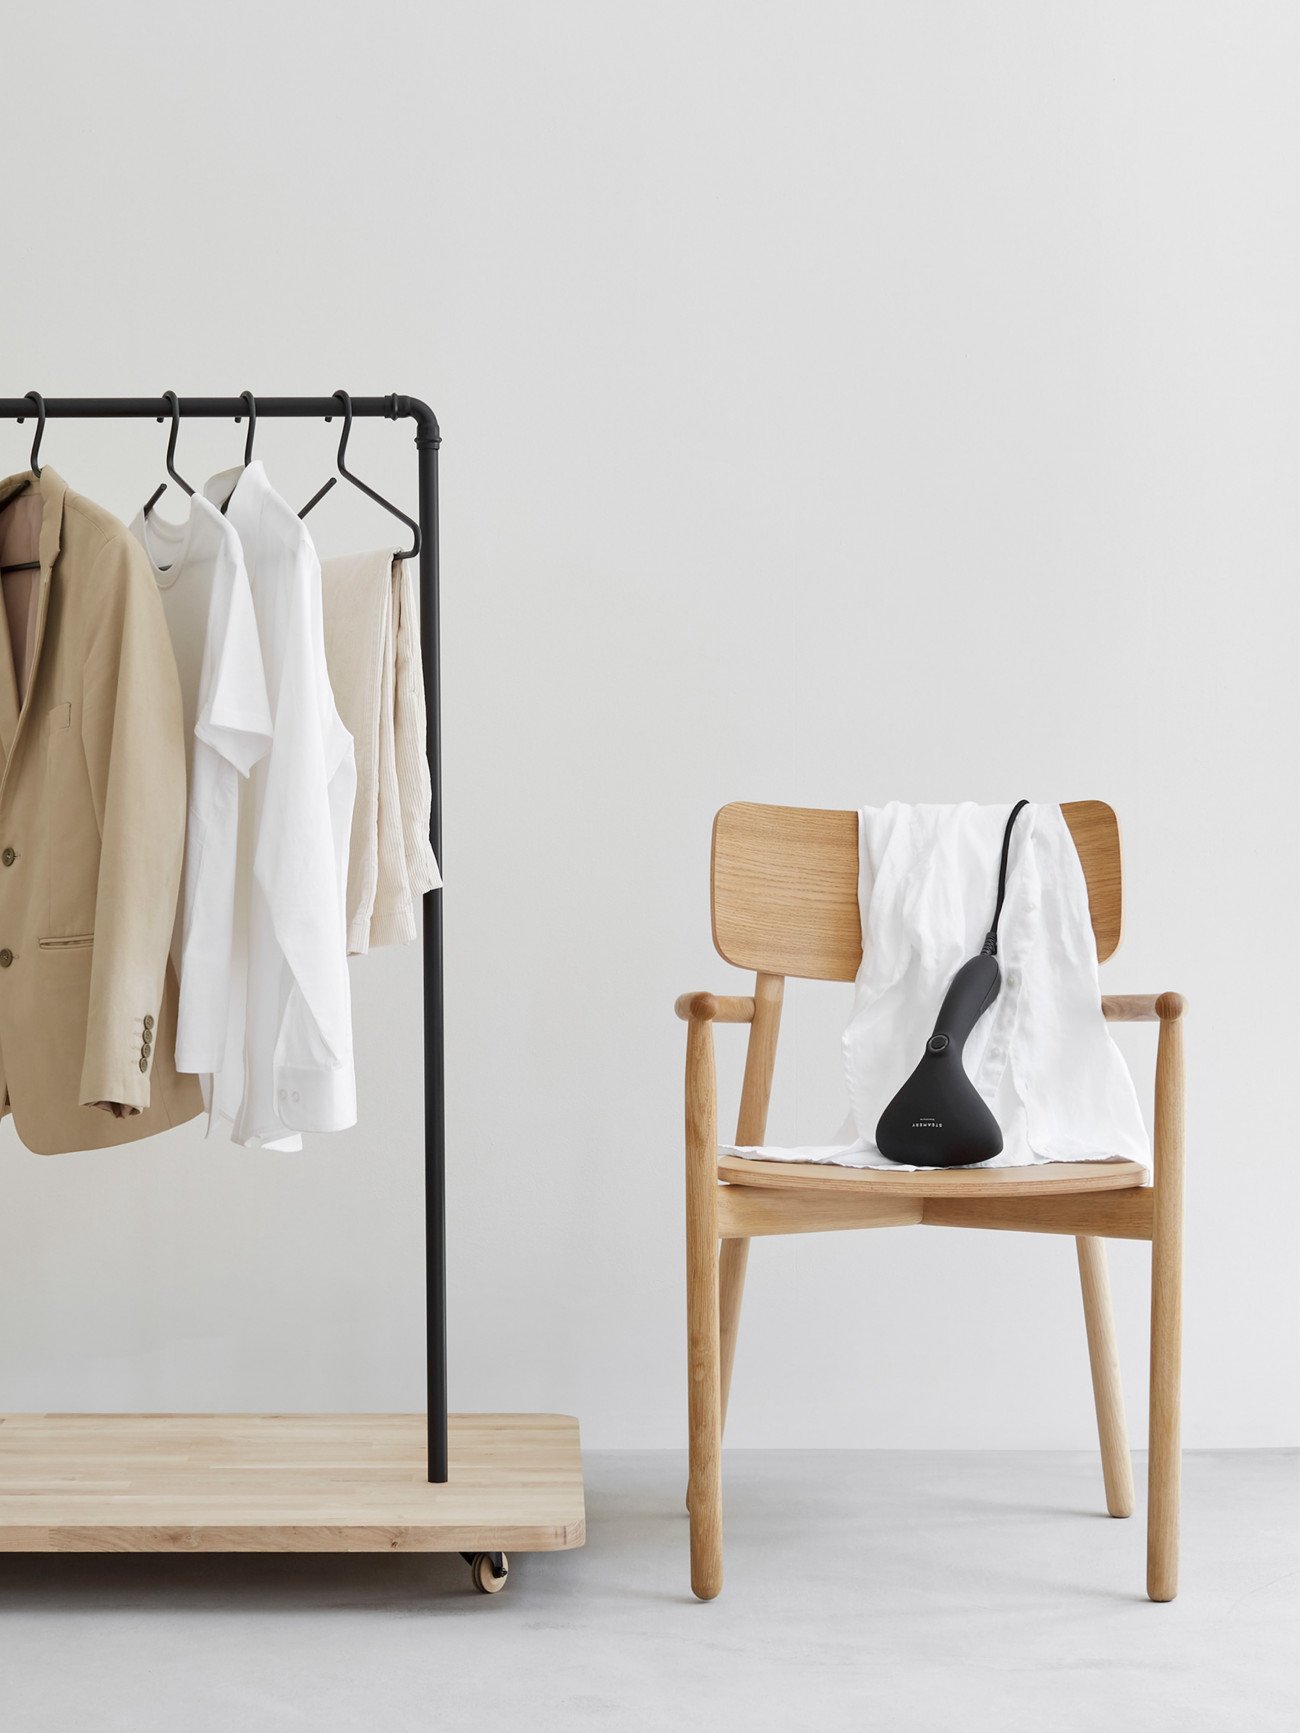 The Steamery Cirrus 2 Handheld Steamer rests over a chair beside a clothing rack.